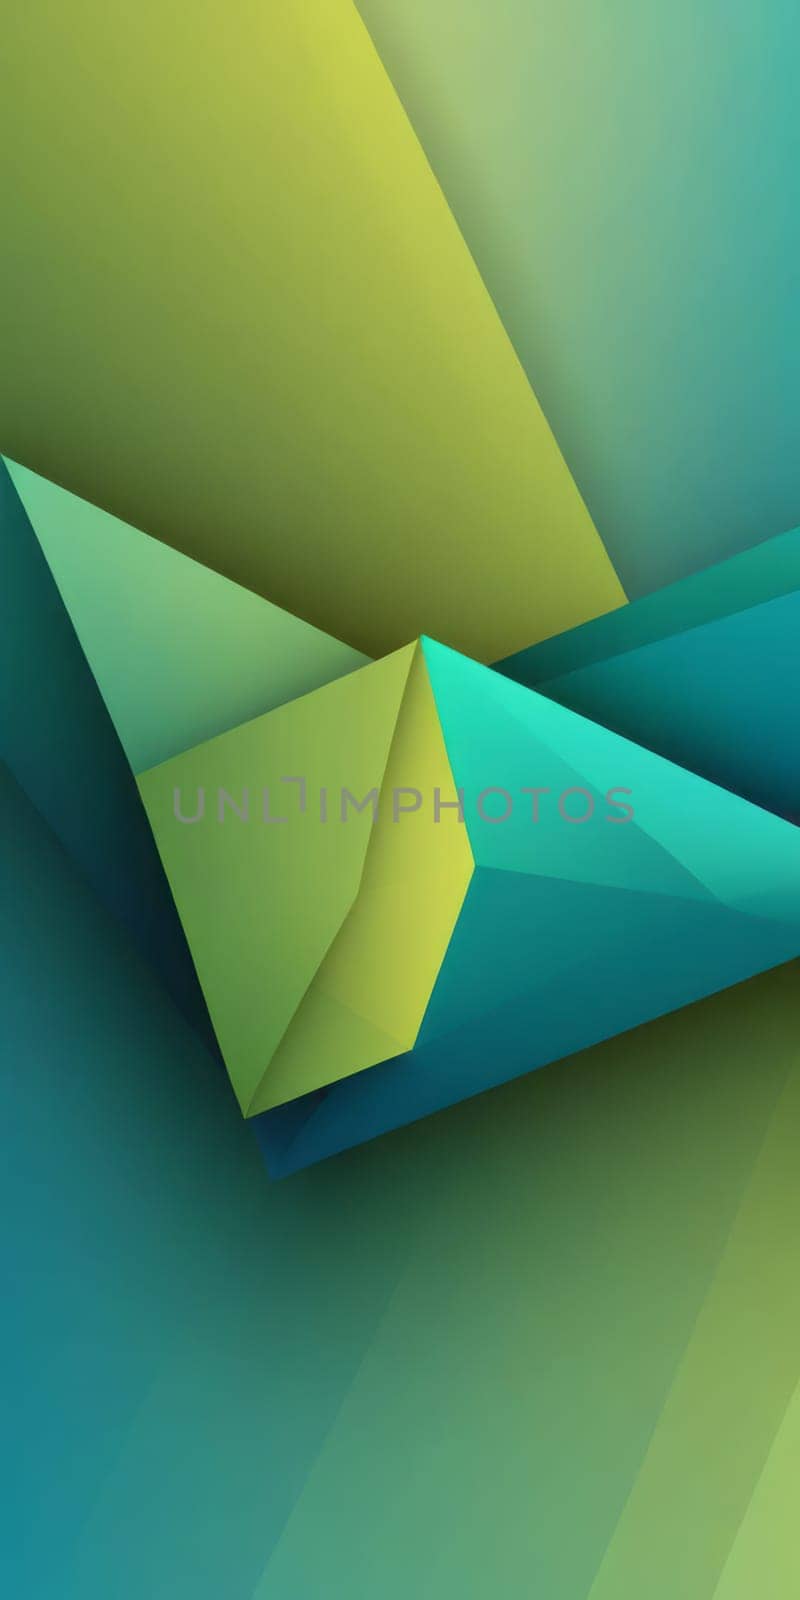 Folded Shapes in Olive and Cyan by nkotlyar